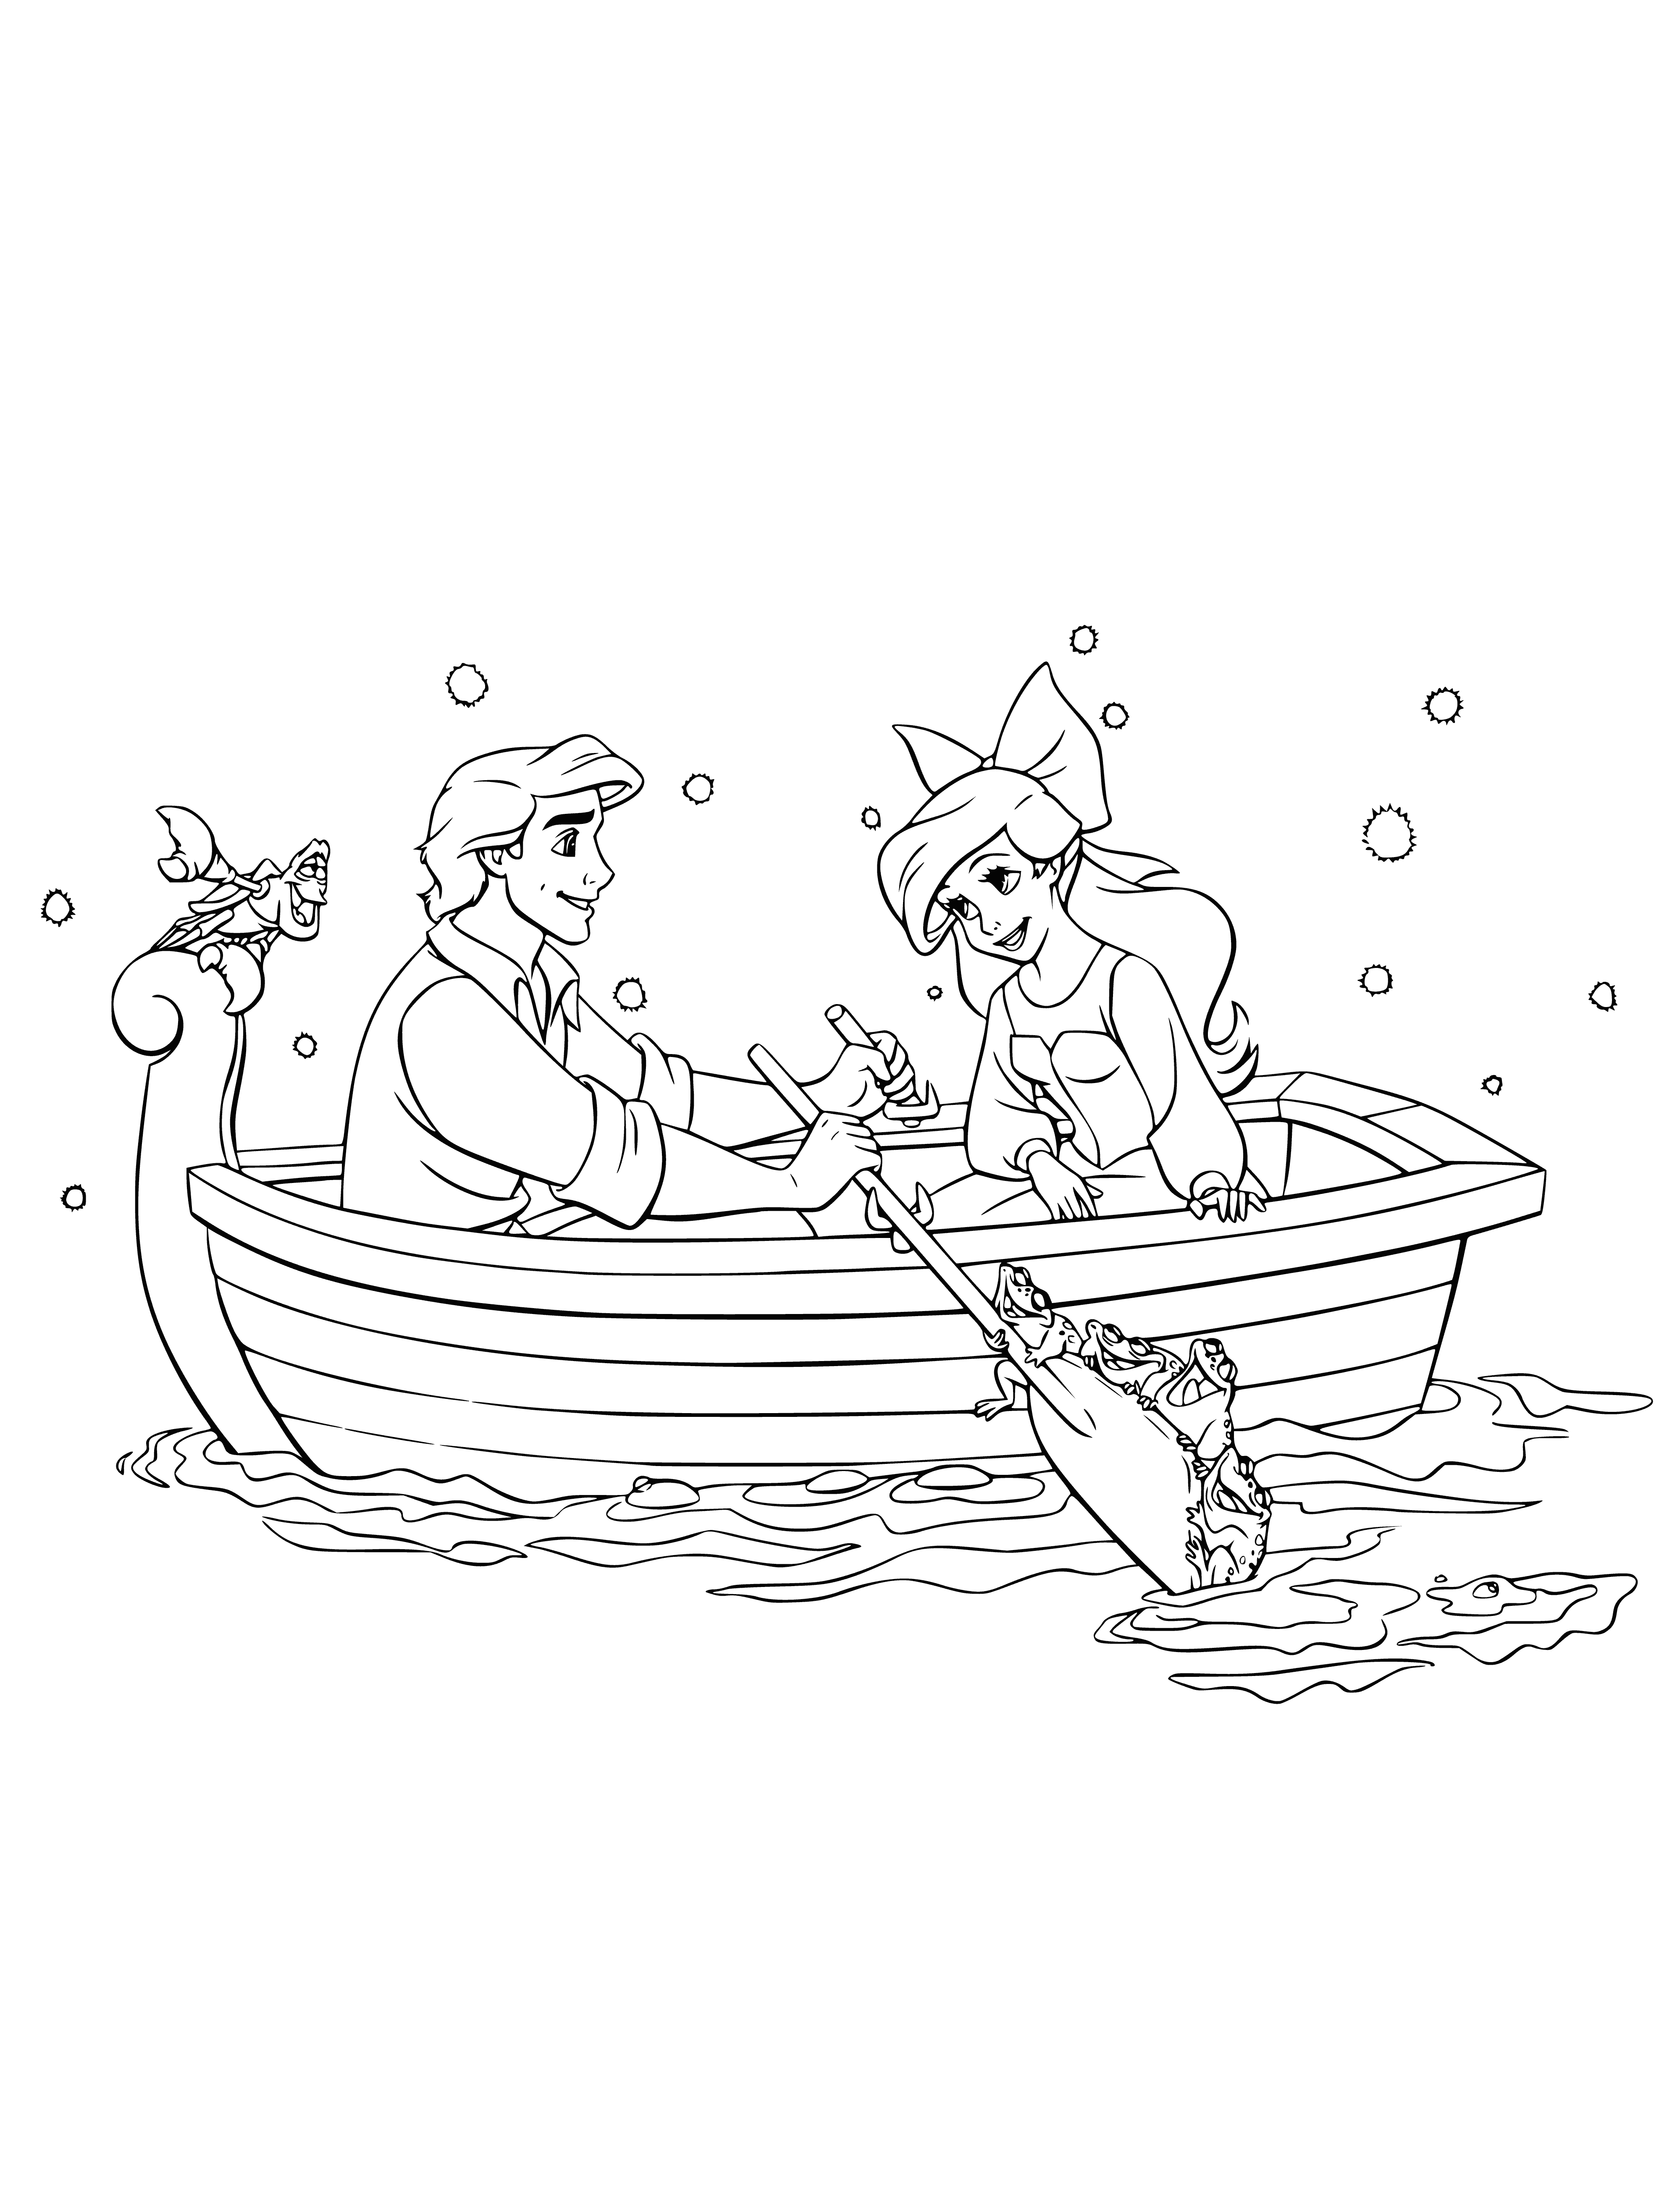 coloring page: Prince on a ship at night holding lantern. Ariel in water looking up, her hair flowing, fish tail. She looks sad.